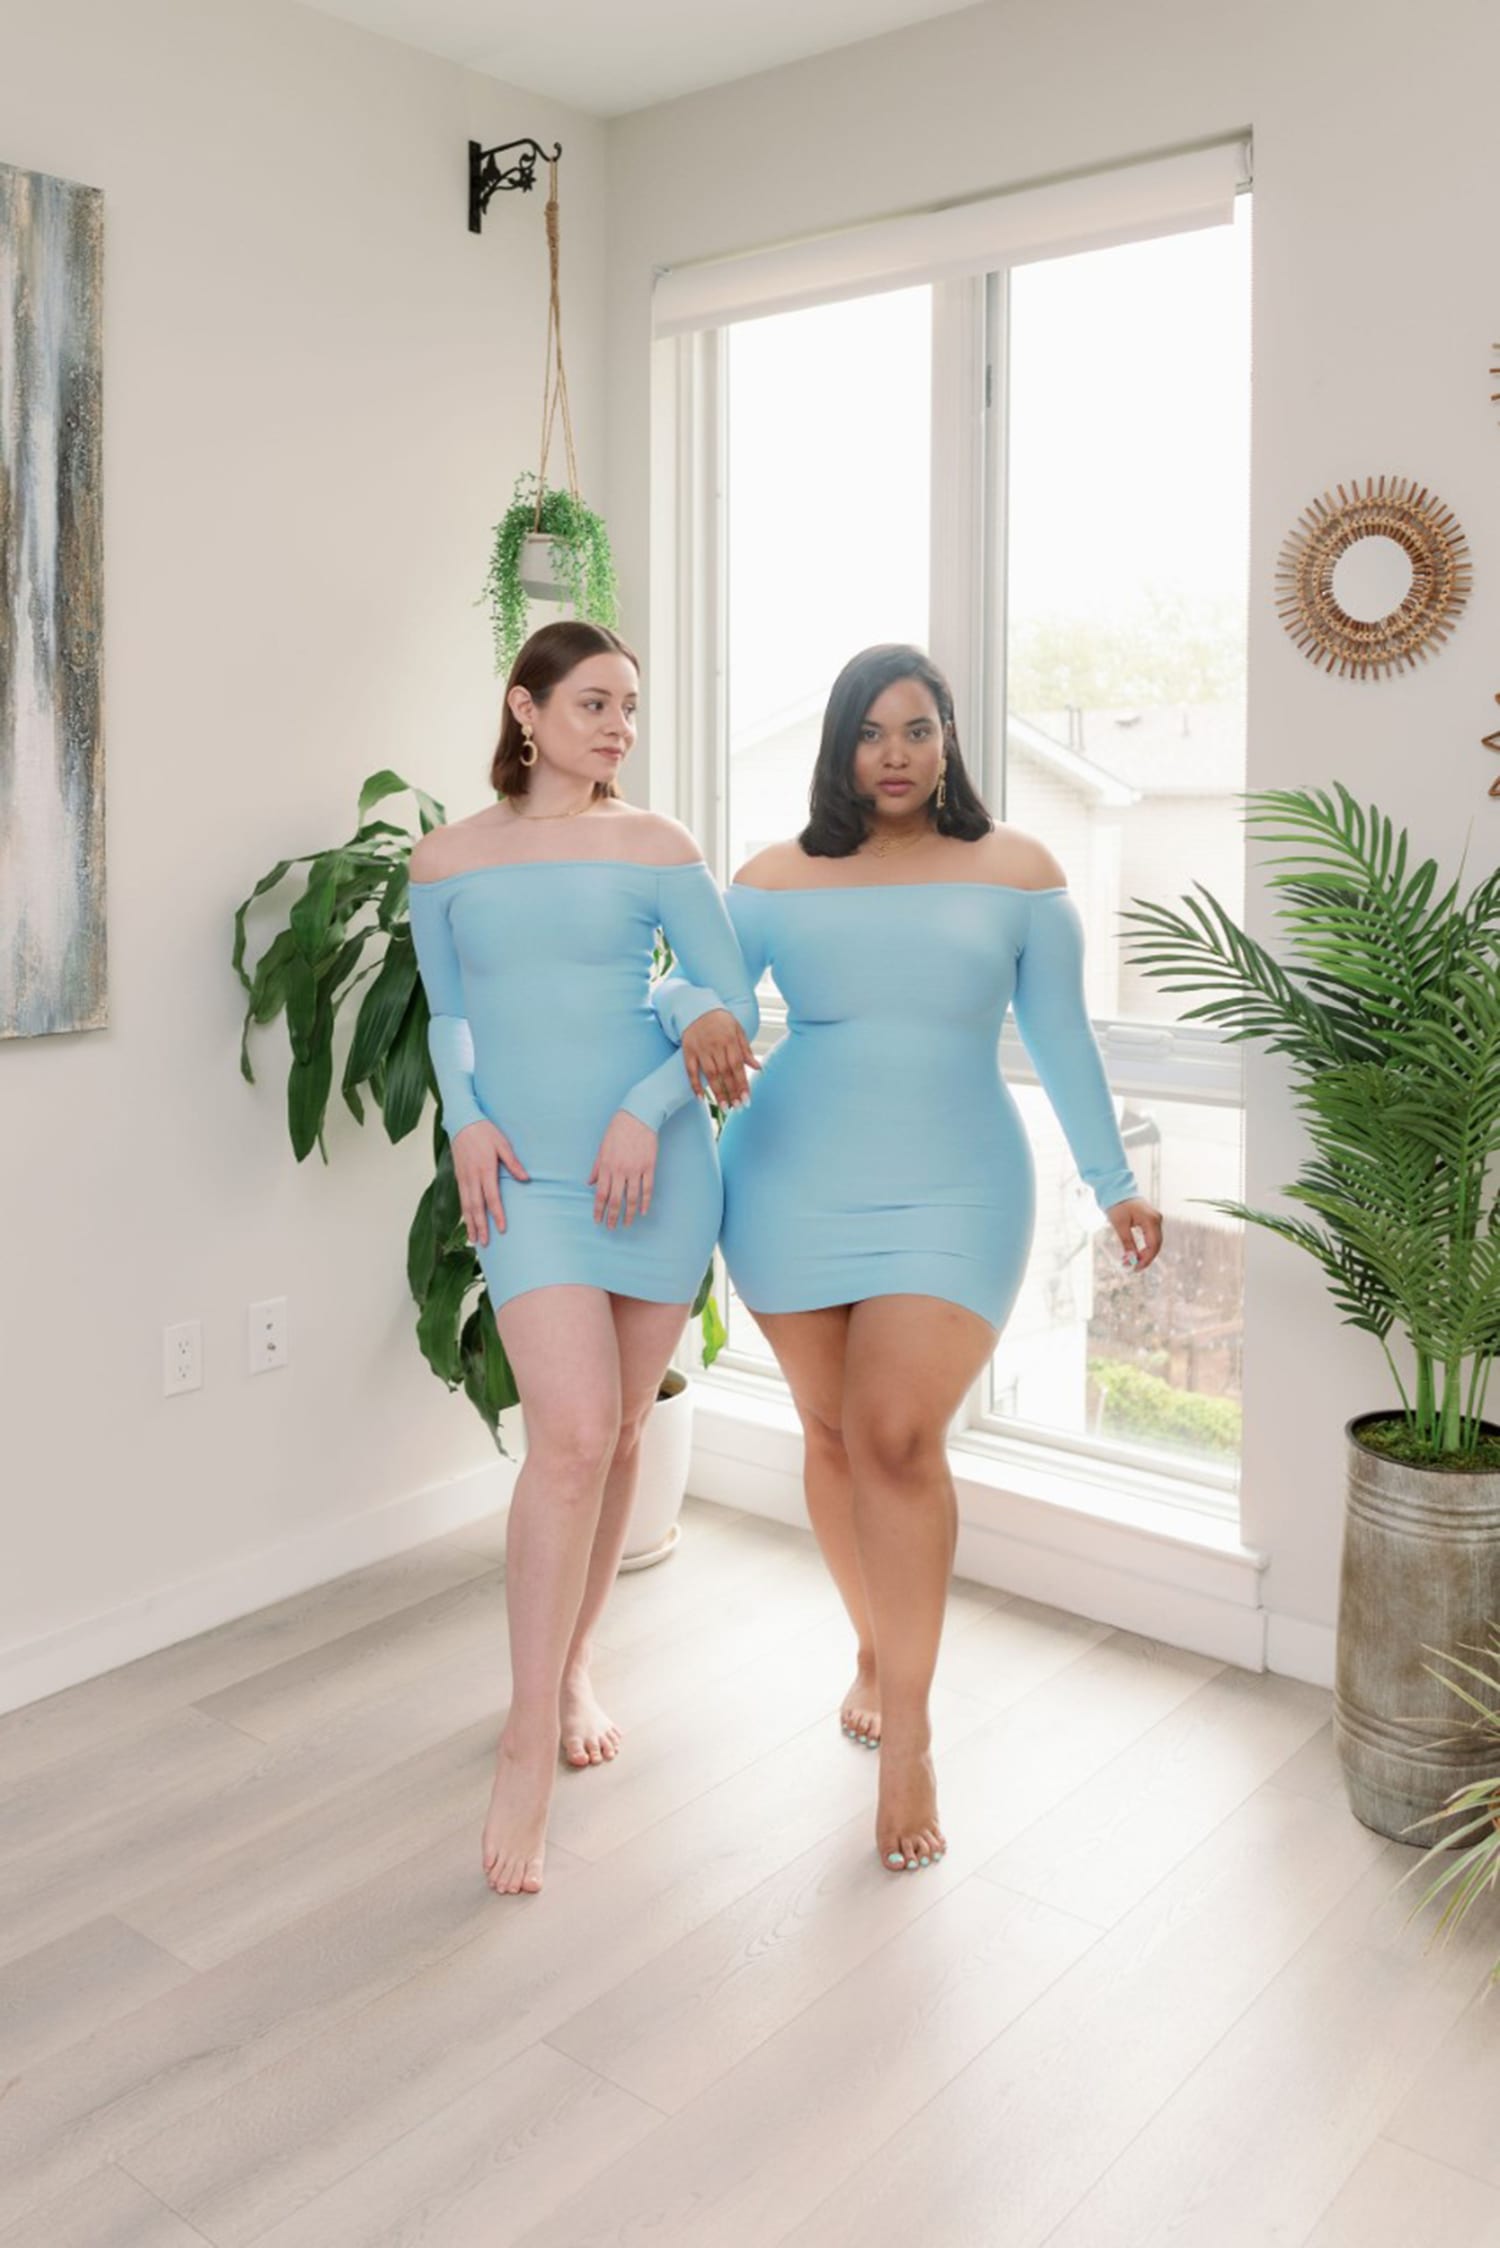 2 friends show off 'style not size' with viral videos wearing same